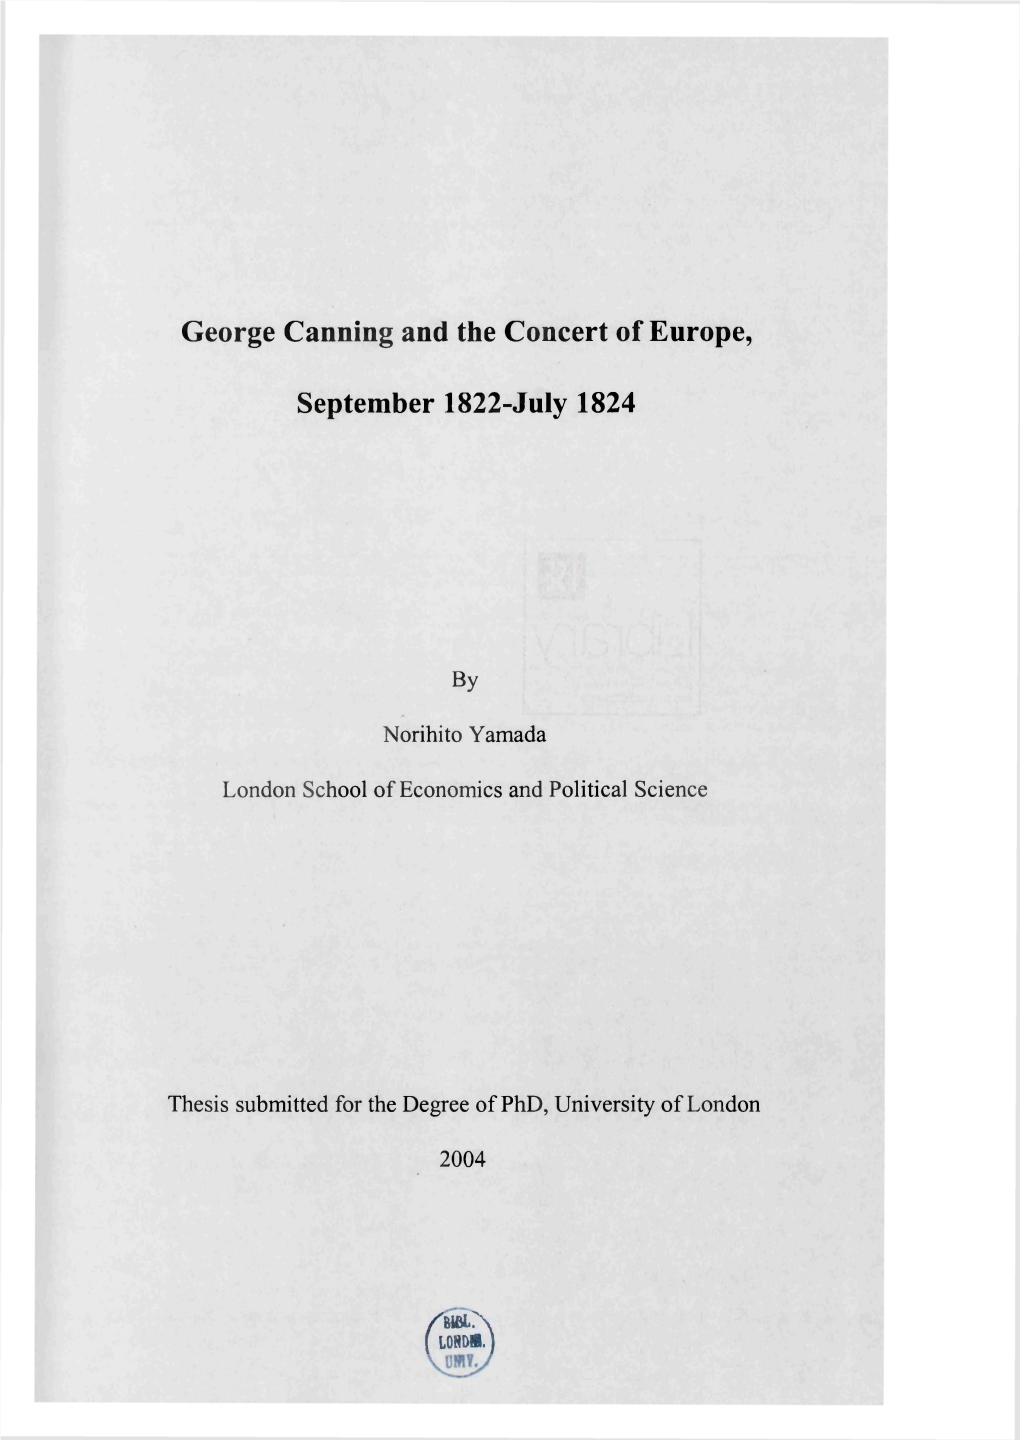 George Canning and the Concert of Europe